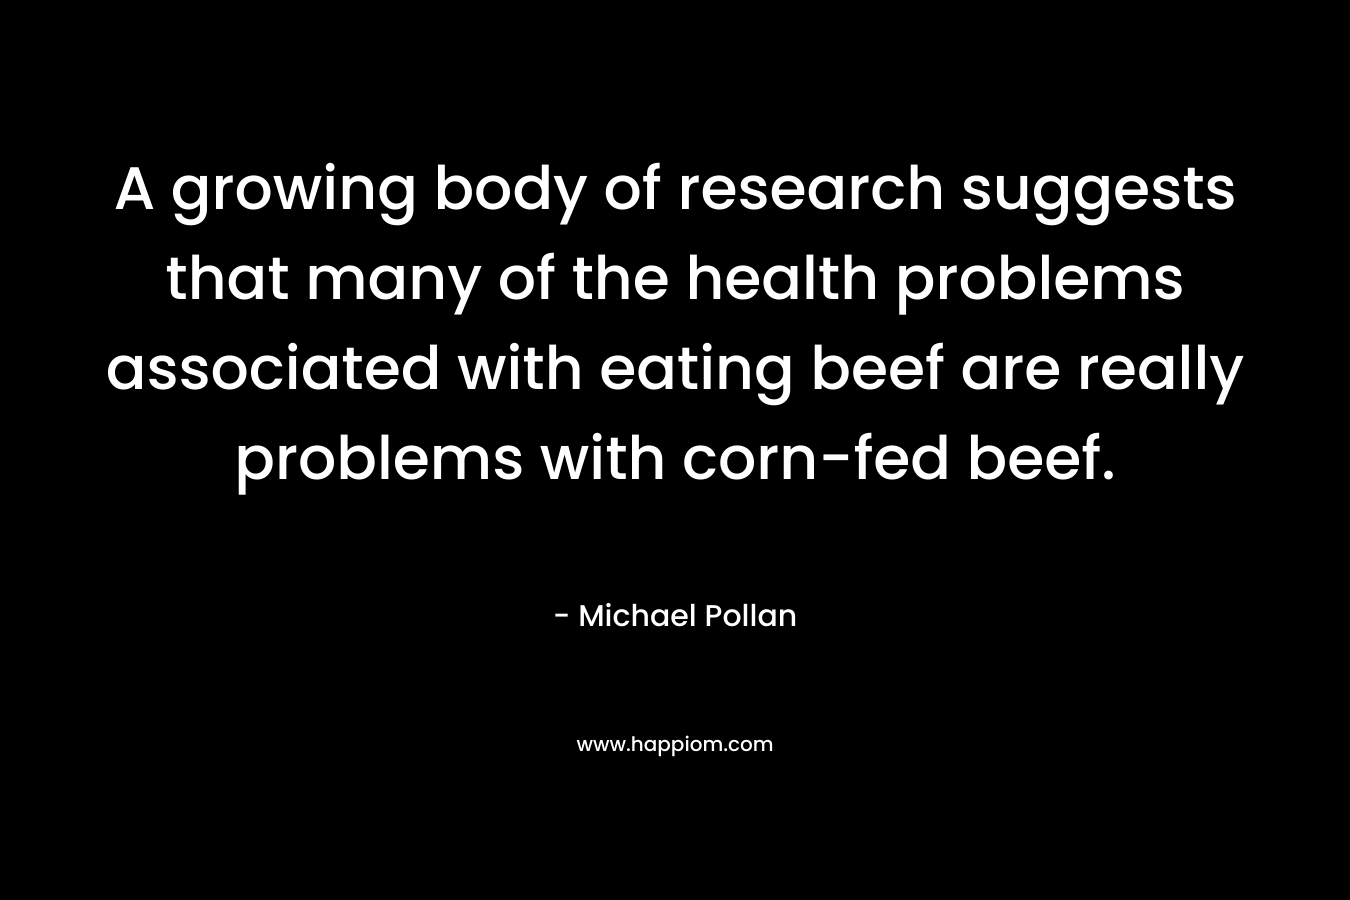 A growing body of research suggests that many of the health problems associated with eating beef are really problems with corn-fed beef. – Michael Pollan